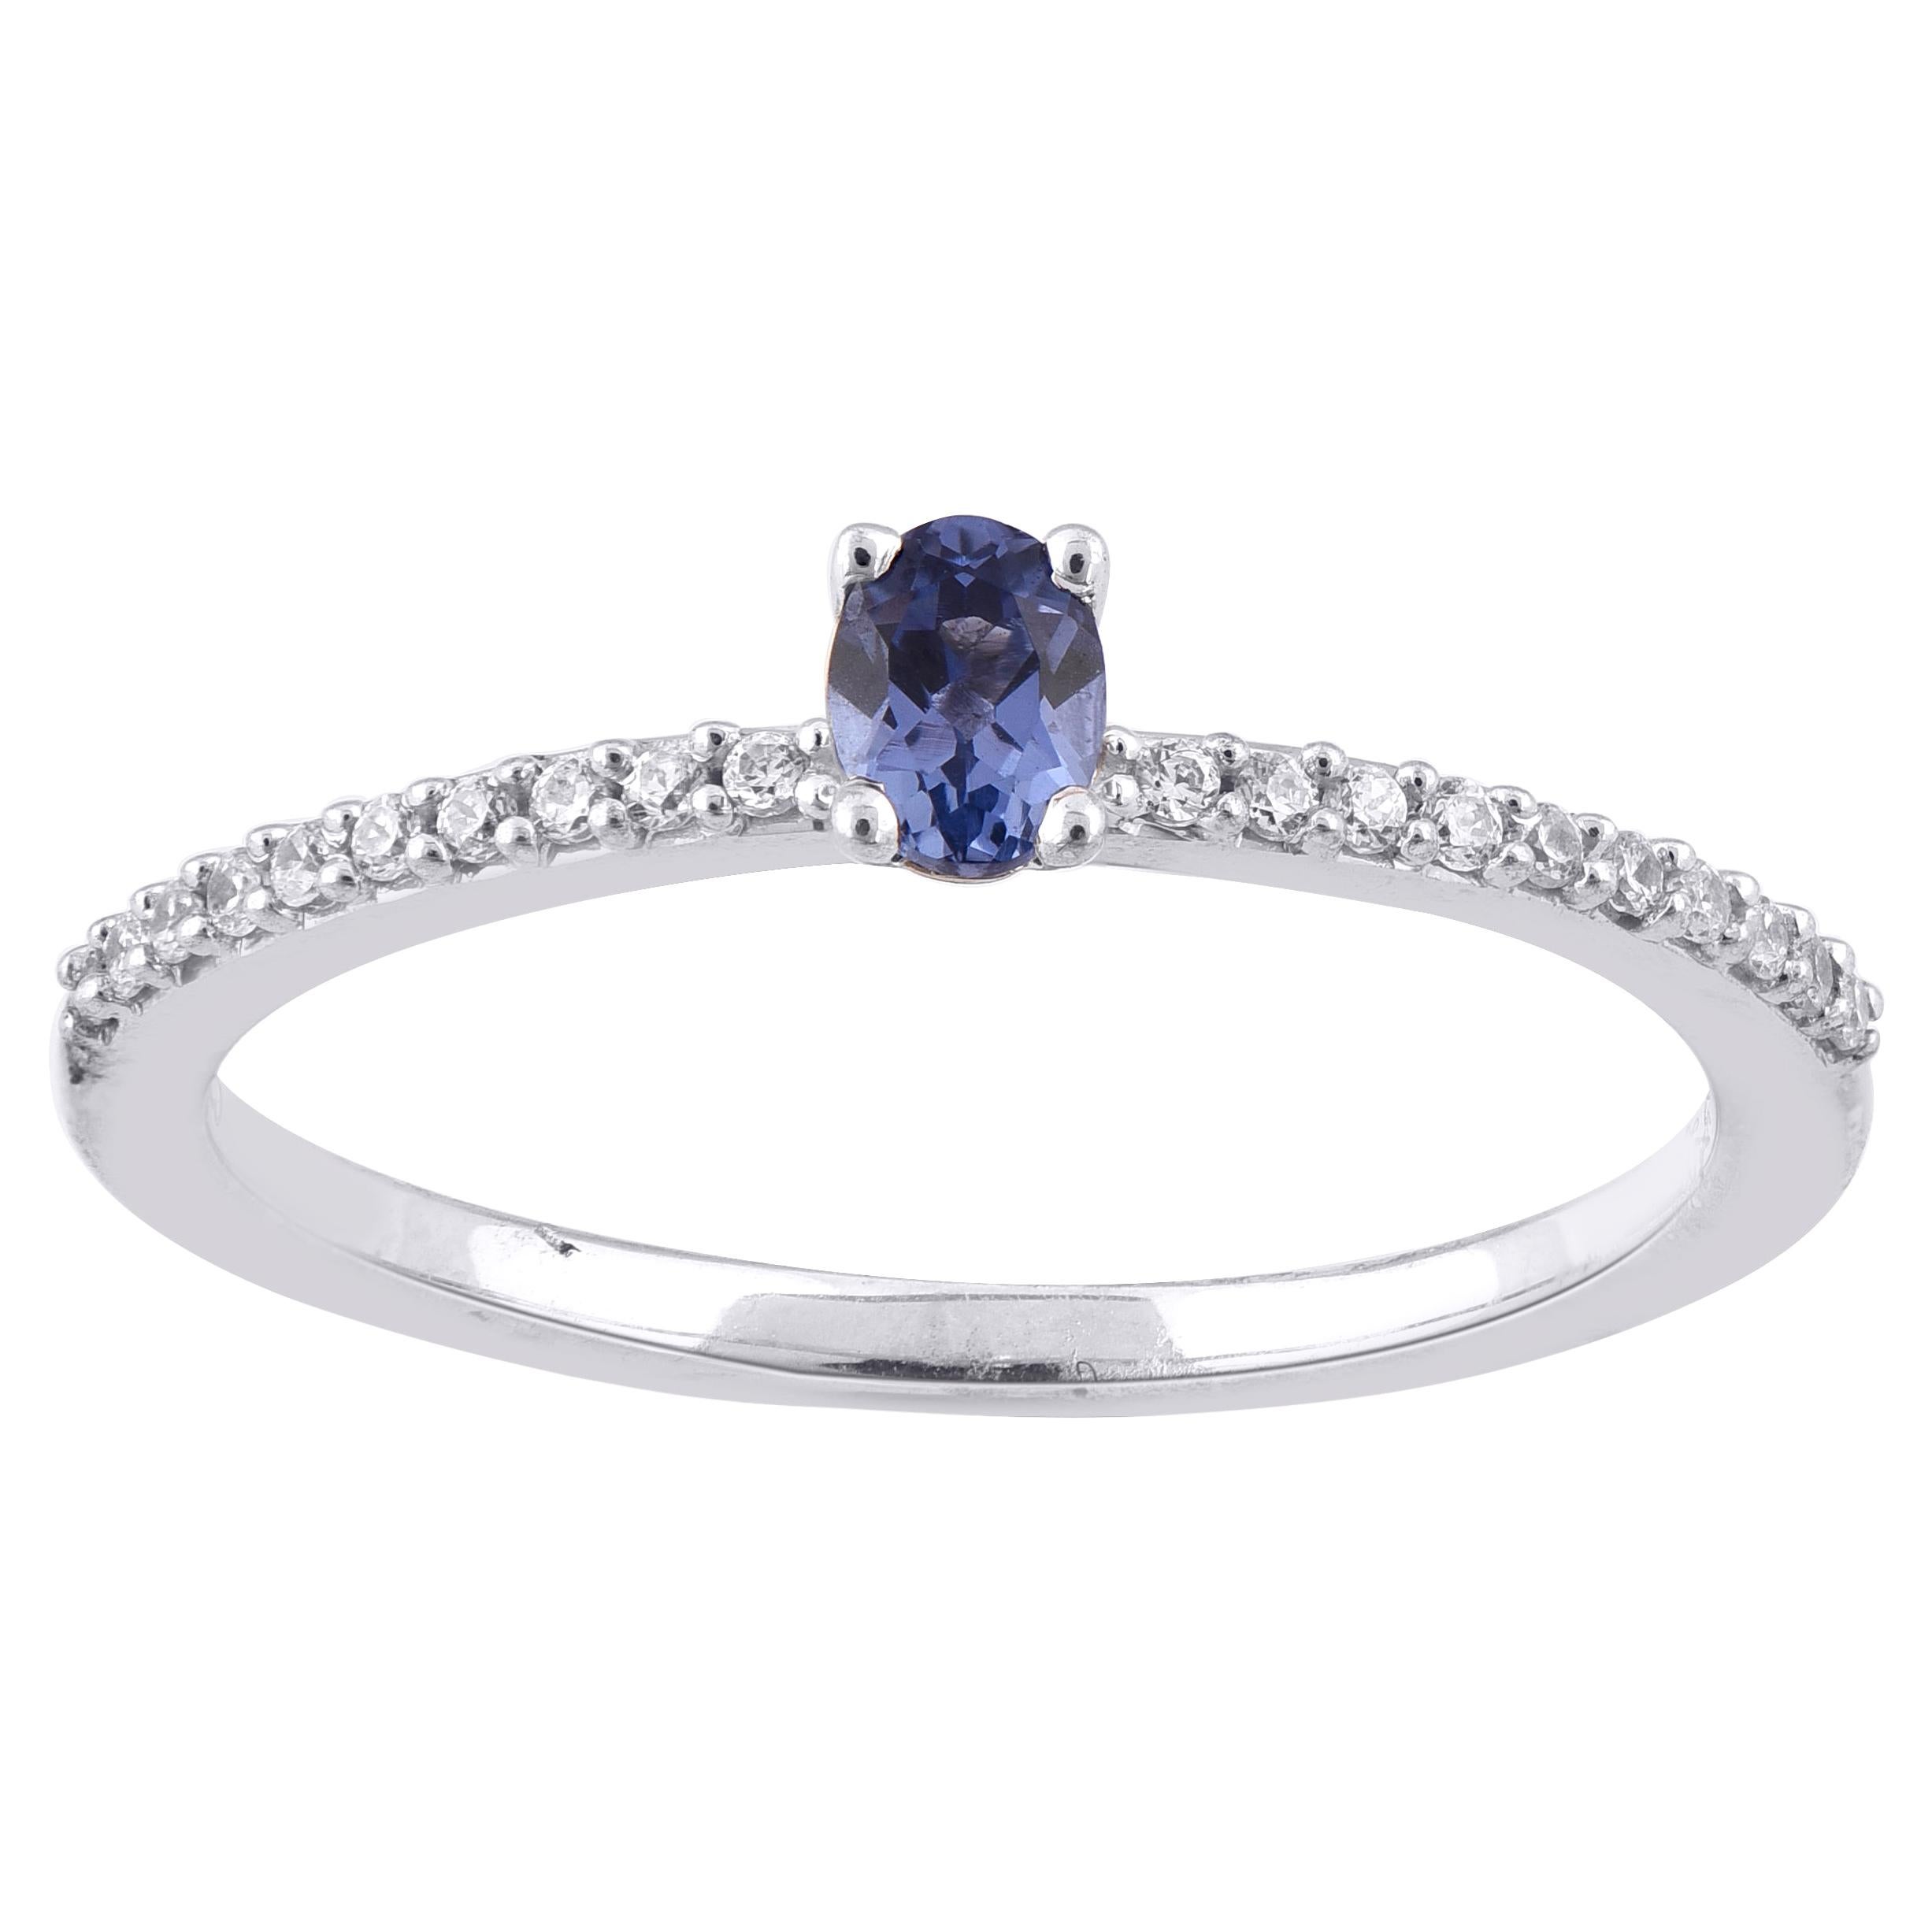 TJD 0.10 Carat 14 Karat White Gold Round and Oval Cut Tanzanite Engagement Ring For Sale